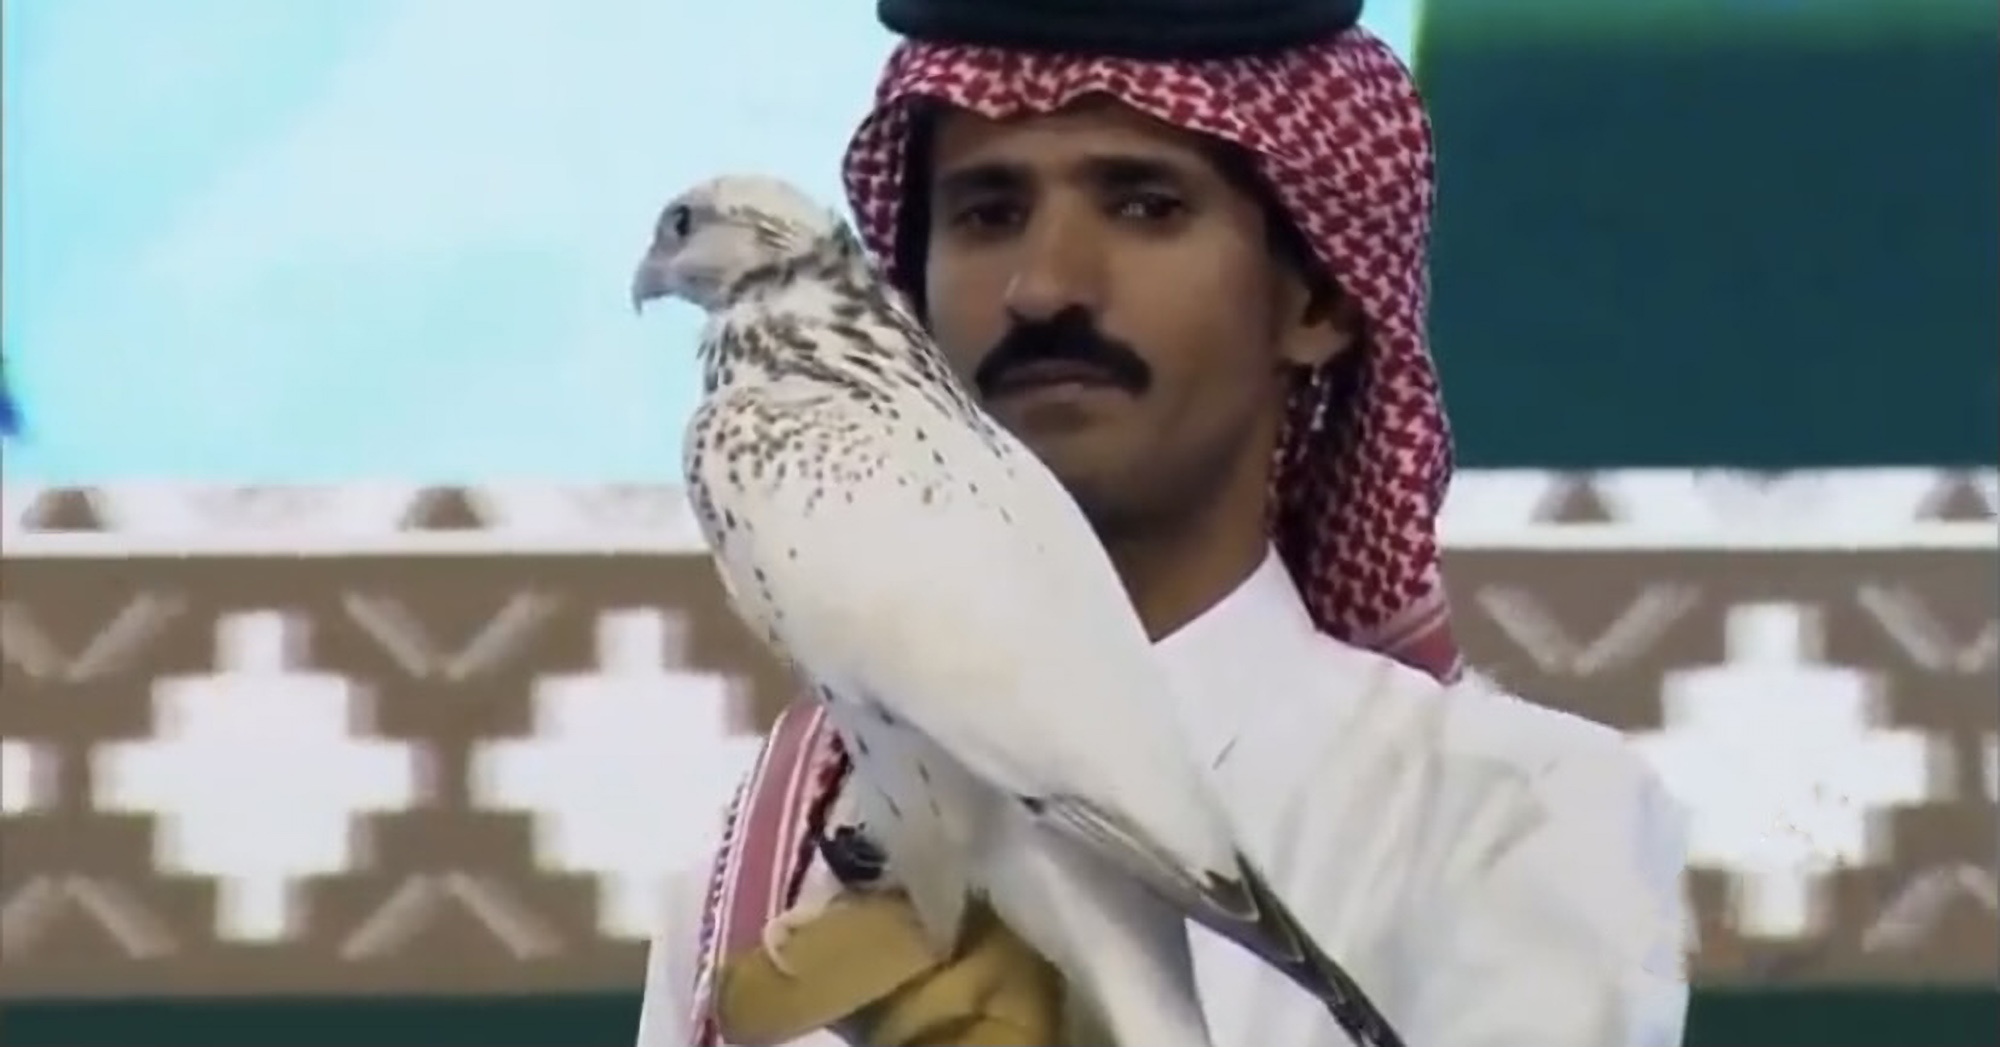 Read more about the article New World Record As Falcon Bird Of Prey Sells For Nearly Half A Million Dollars At Saudi Auction